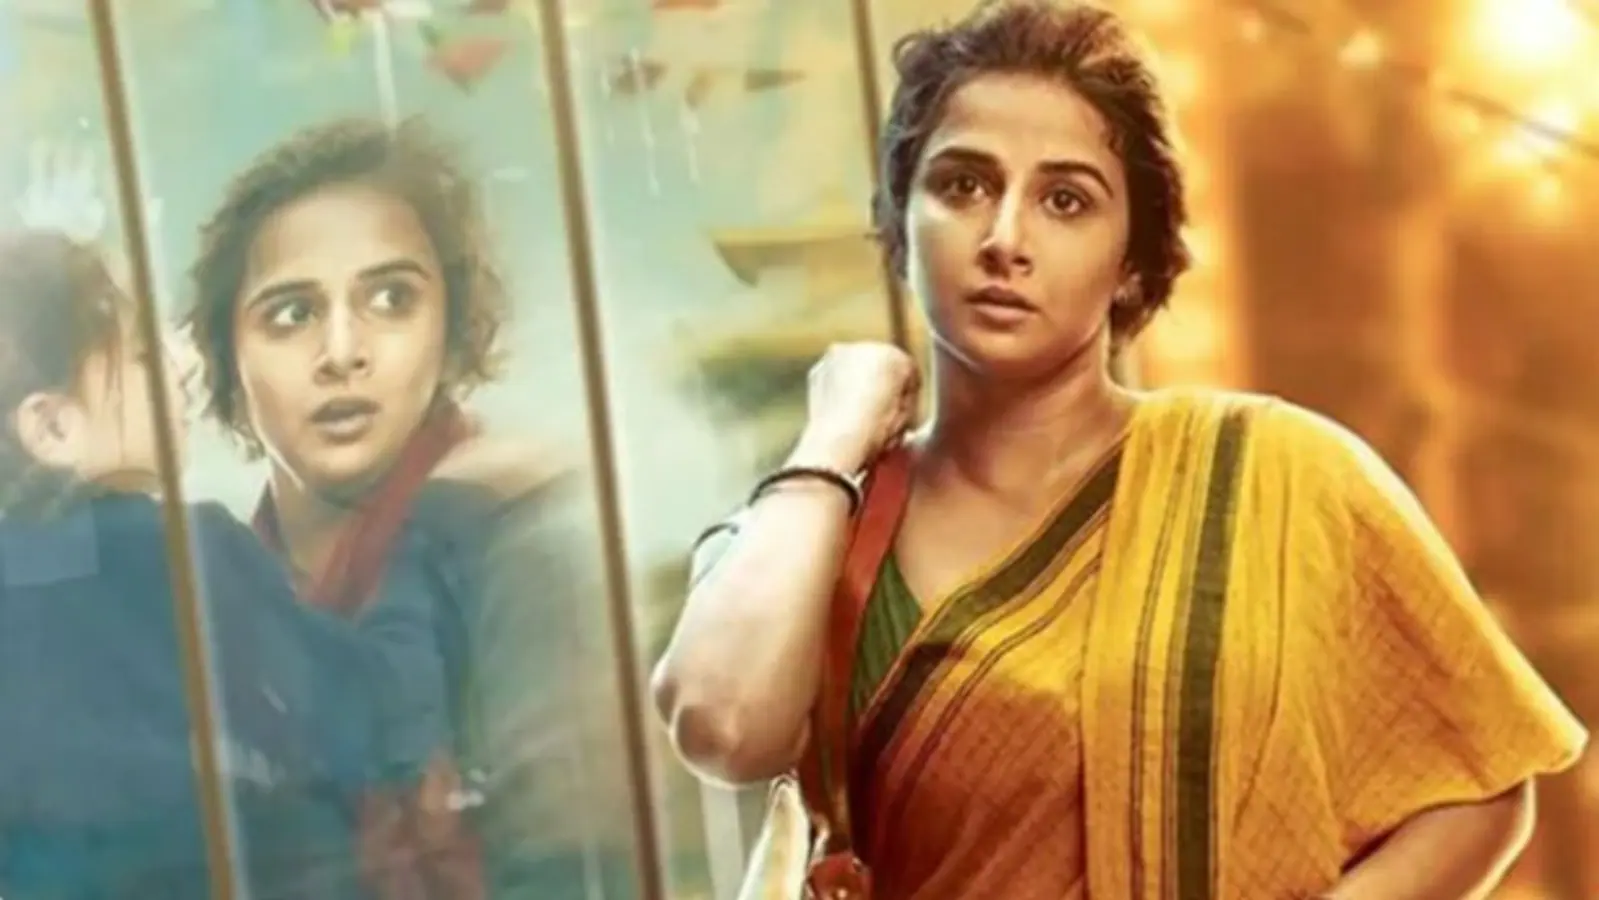 Vidya Balan wishes Kahaani 2 did better in theatres, blames demonetisation: ‘It’s comforting that there’s an excuse’